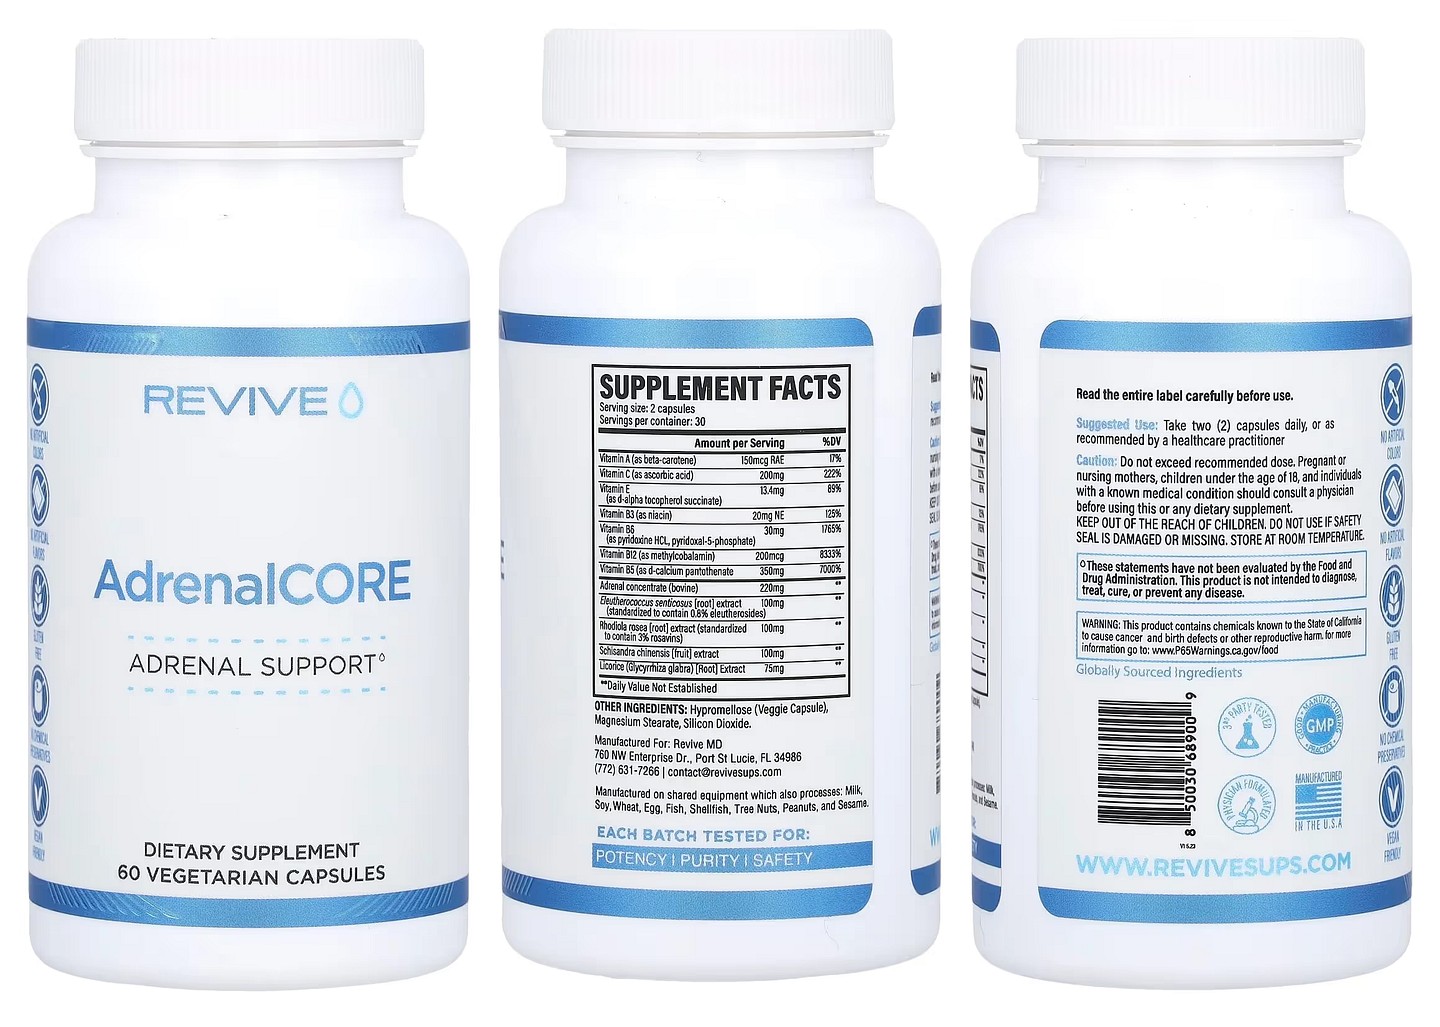 Revive, AdrenalCORE packaging